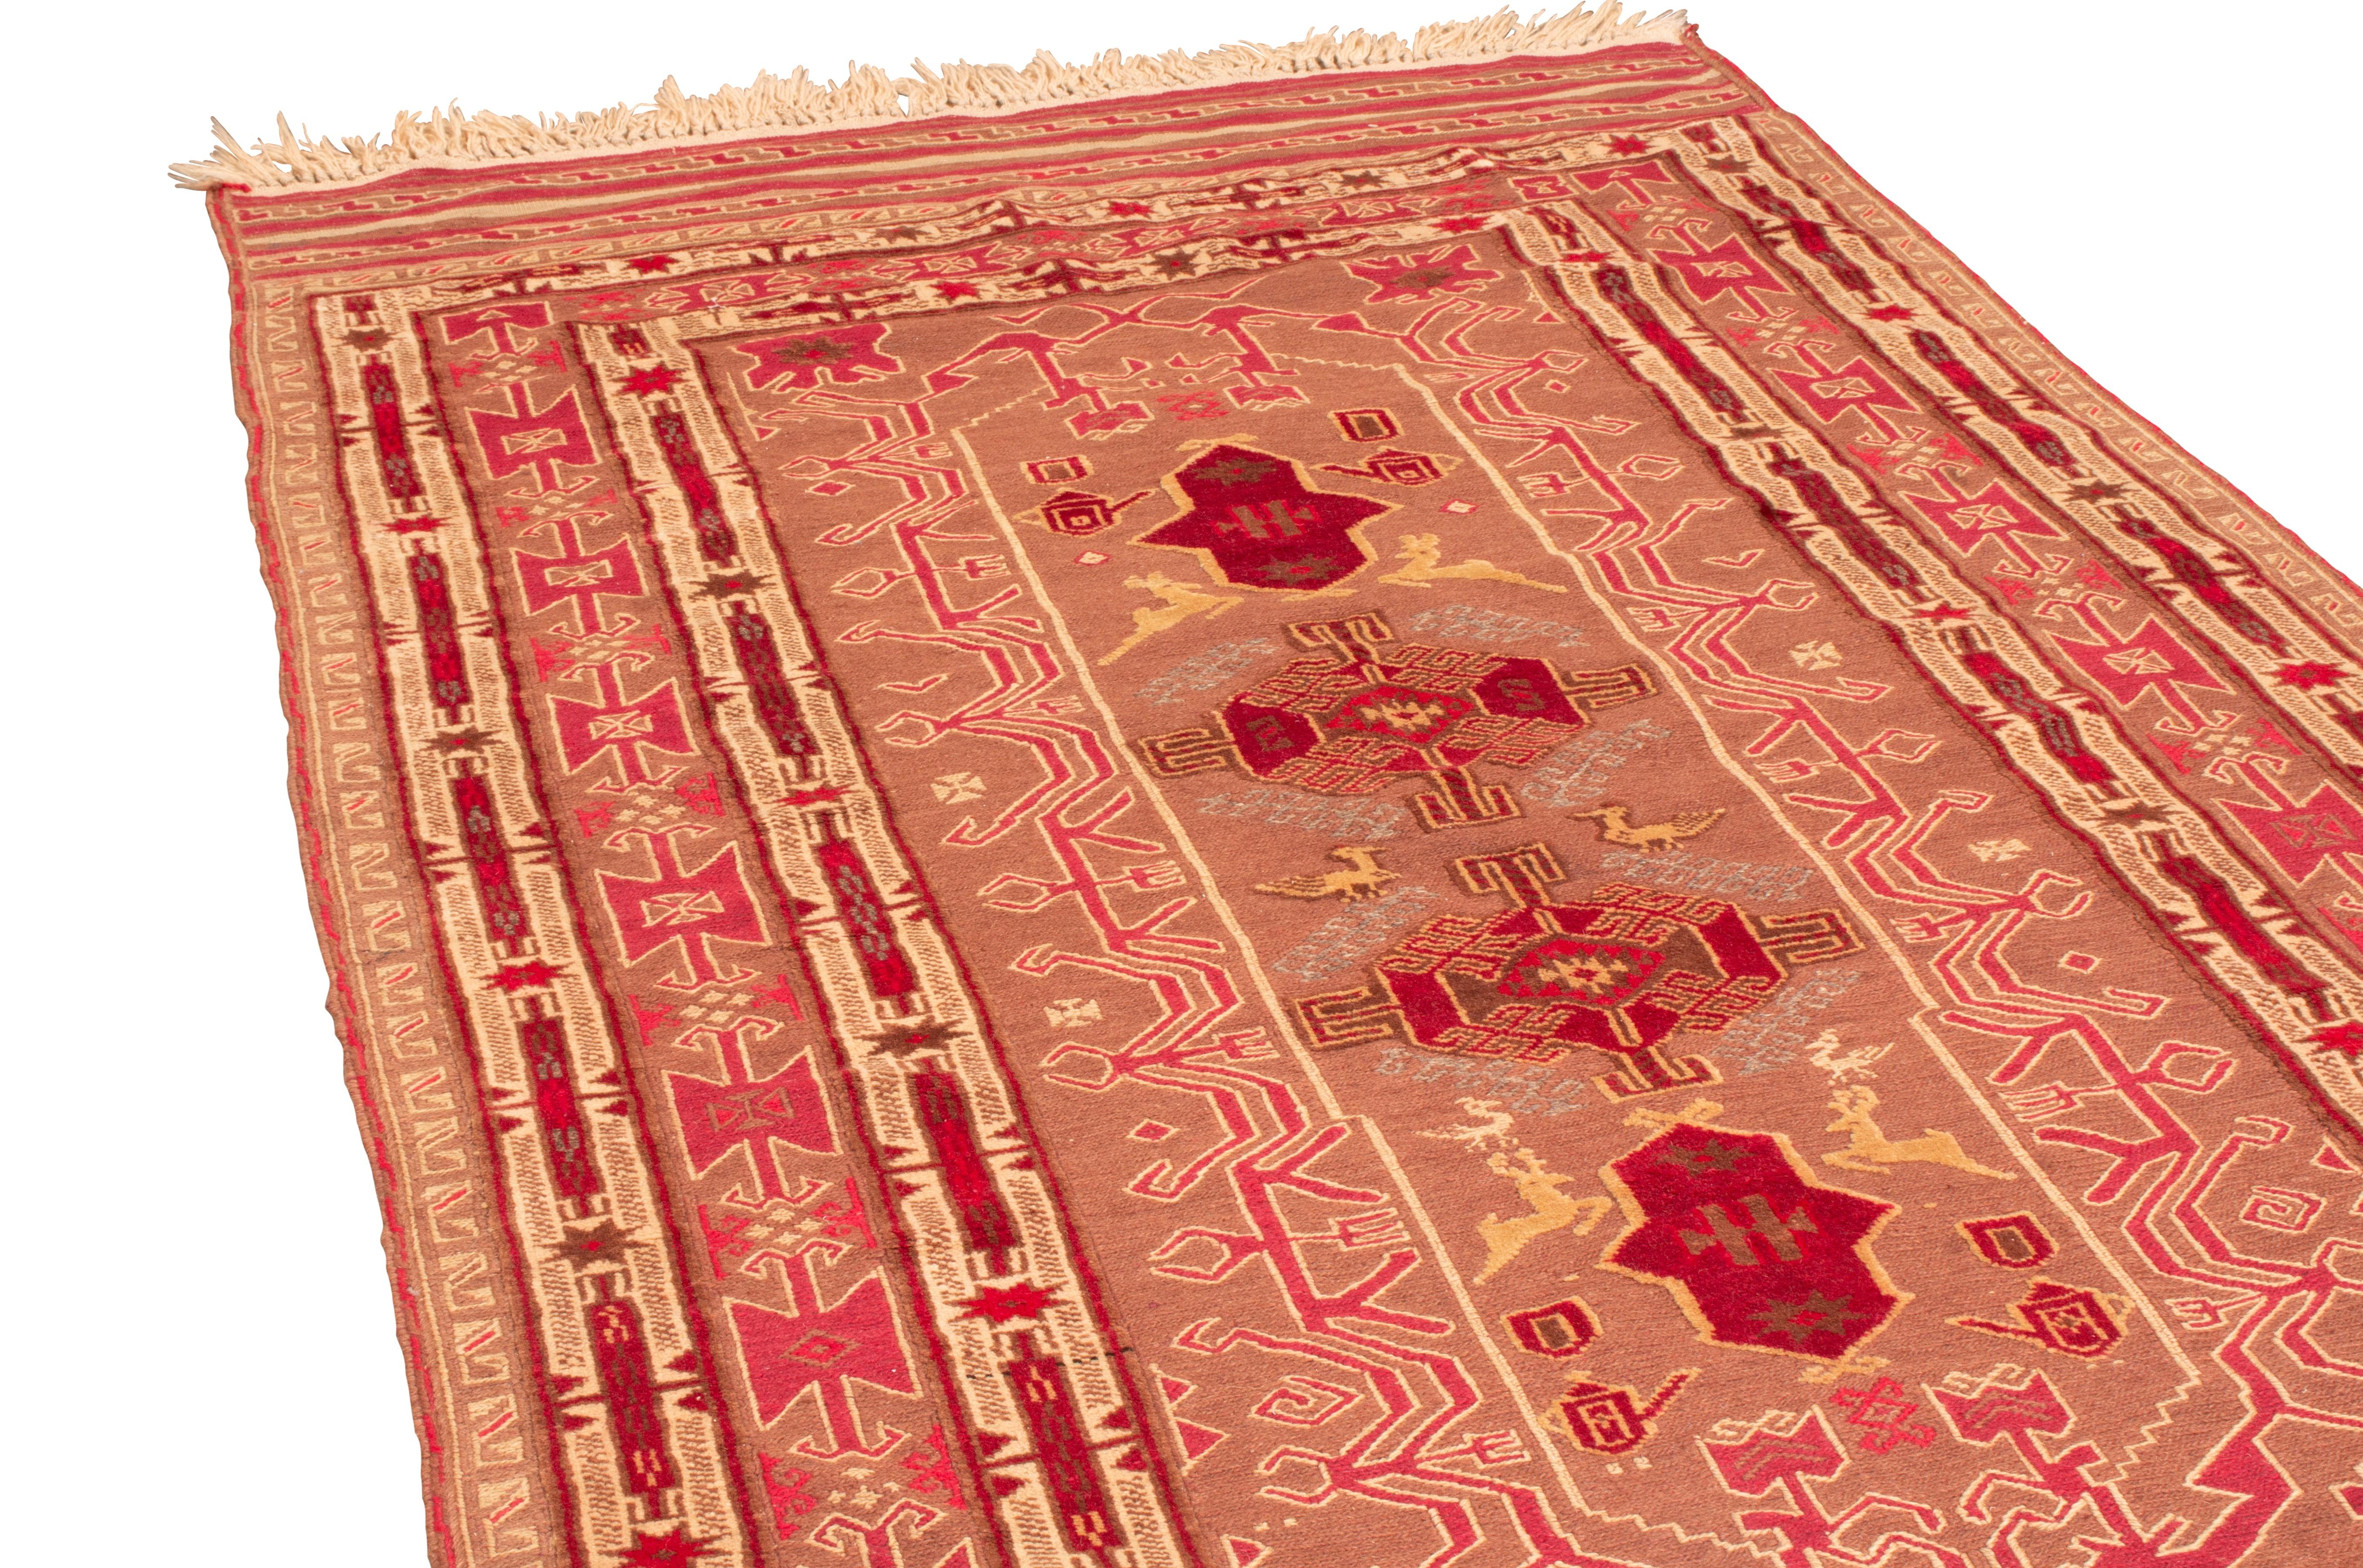 Originating from Persia in 1960, this vintage transitional Persian kilim rug features several lesser-known animal symbols celebrated among its kind. Flat woven in tight, durable wool, between the ornate crimson red, brown, and beige-golden field